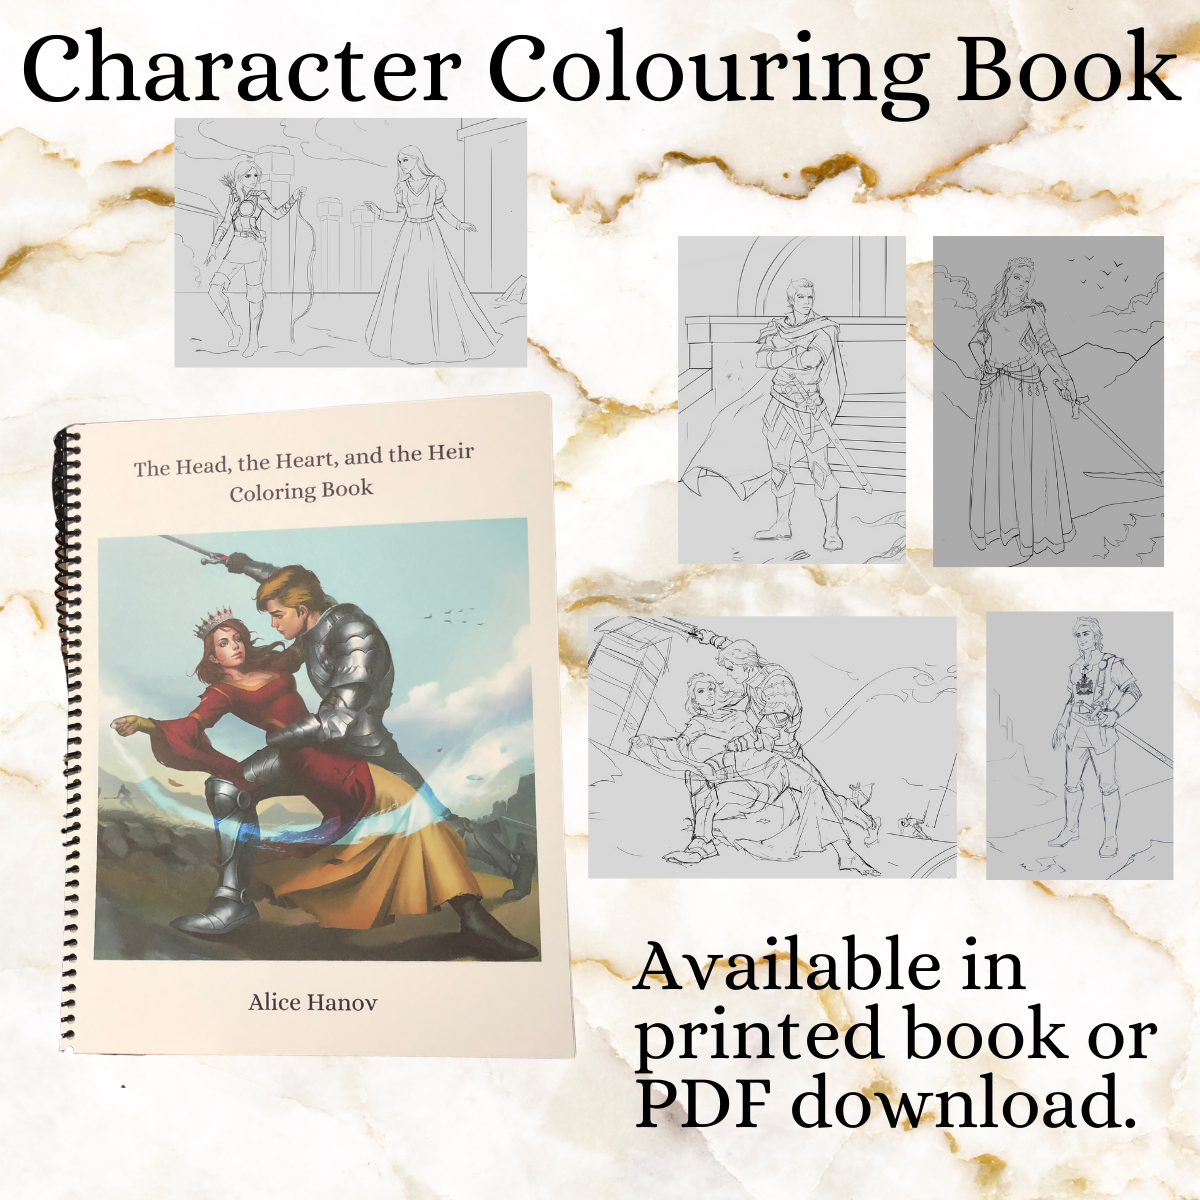 Image of character colouring book with sample pages and note it is availble in physical form and pdf